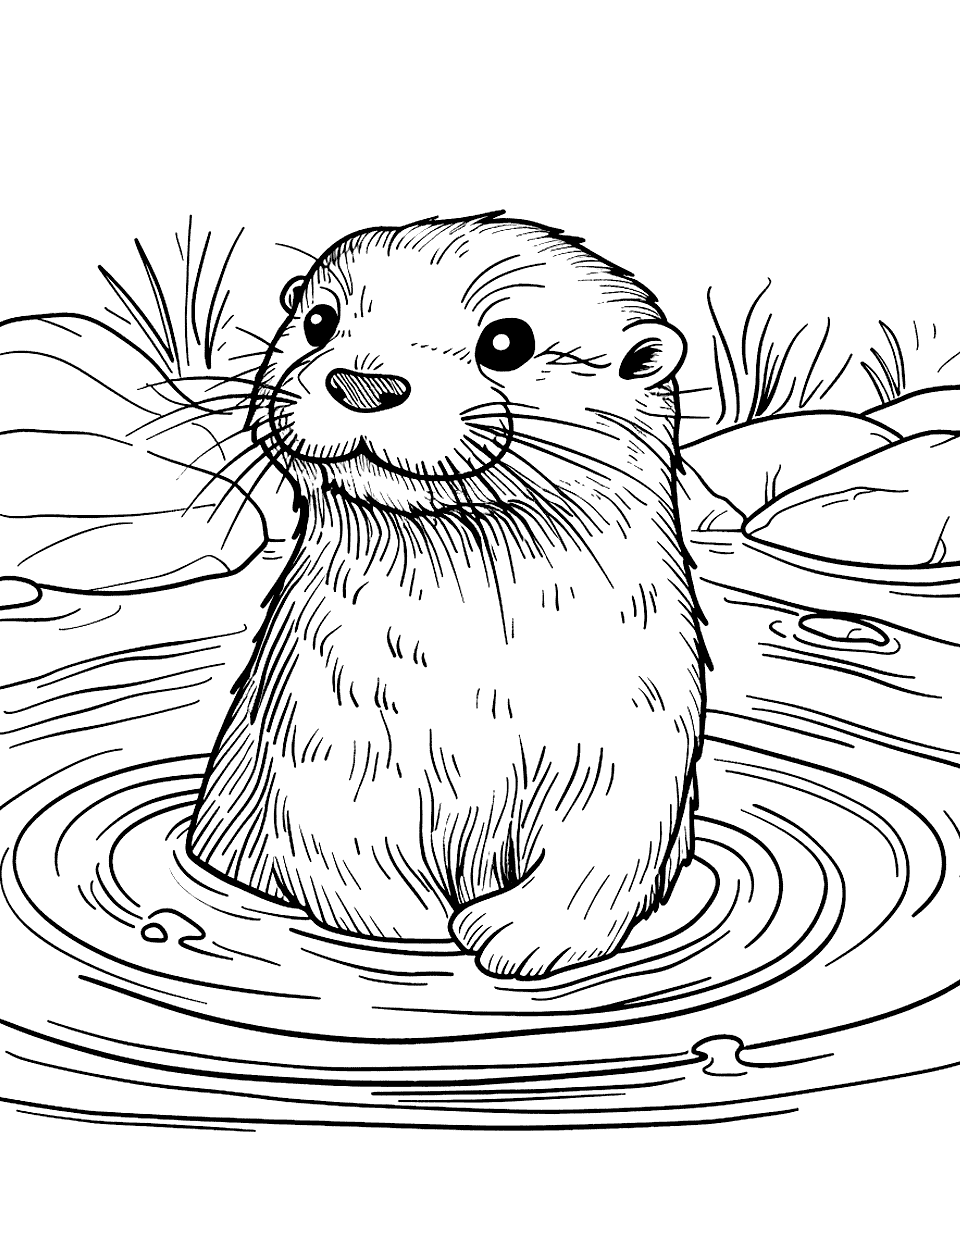 Baby Otter Learning to Swim Coloring Page - A baby otter in the water, with tiny ripples around as it learns to swim.